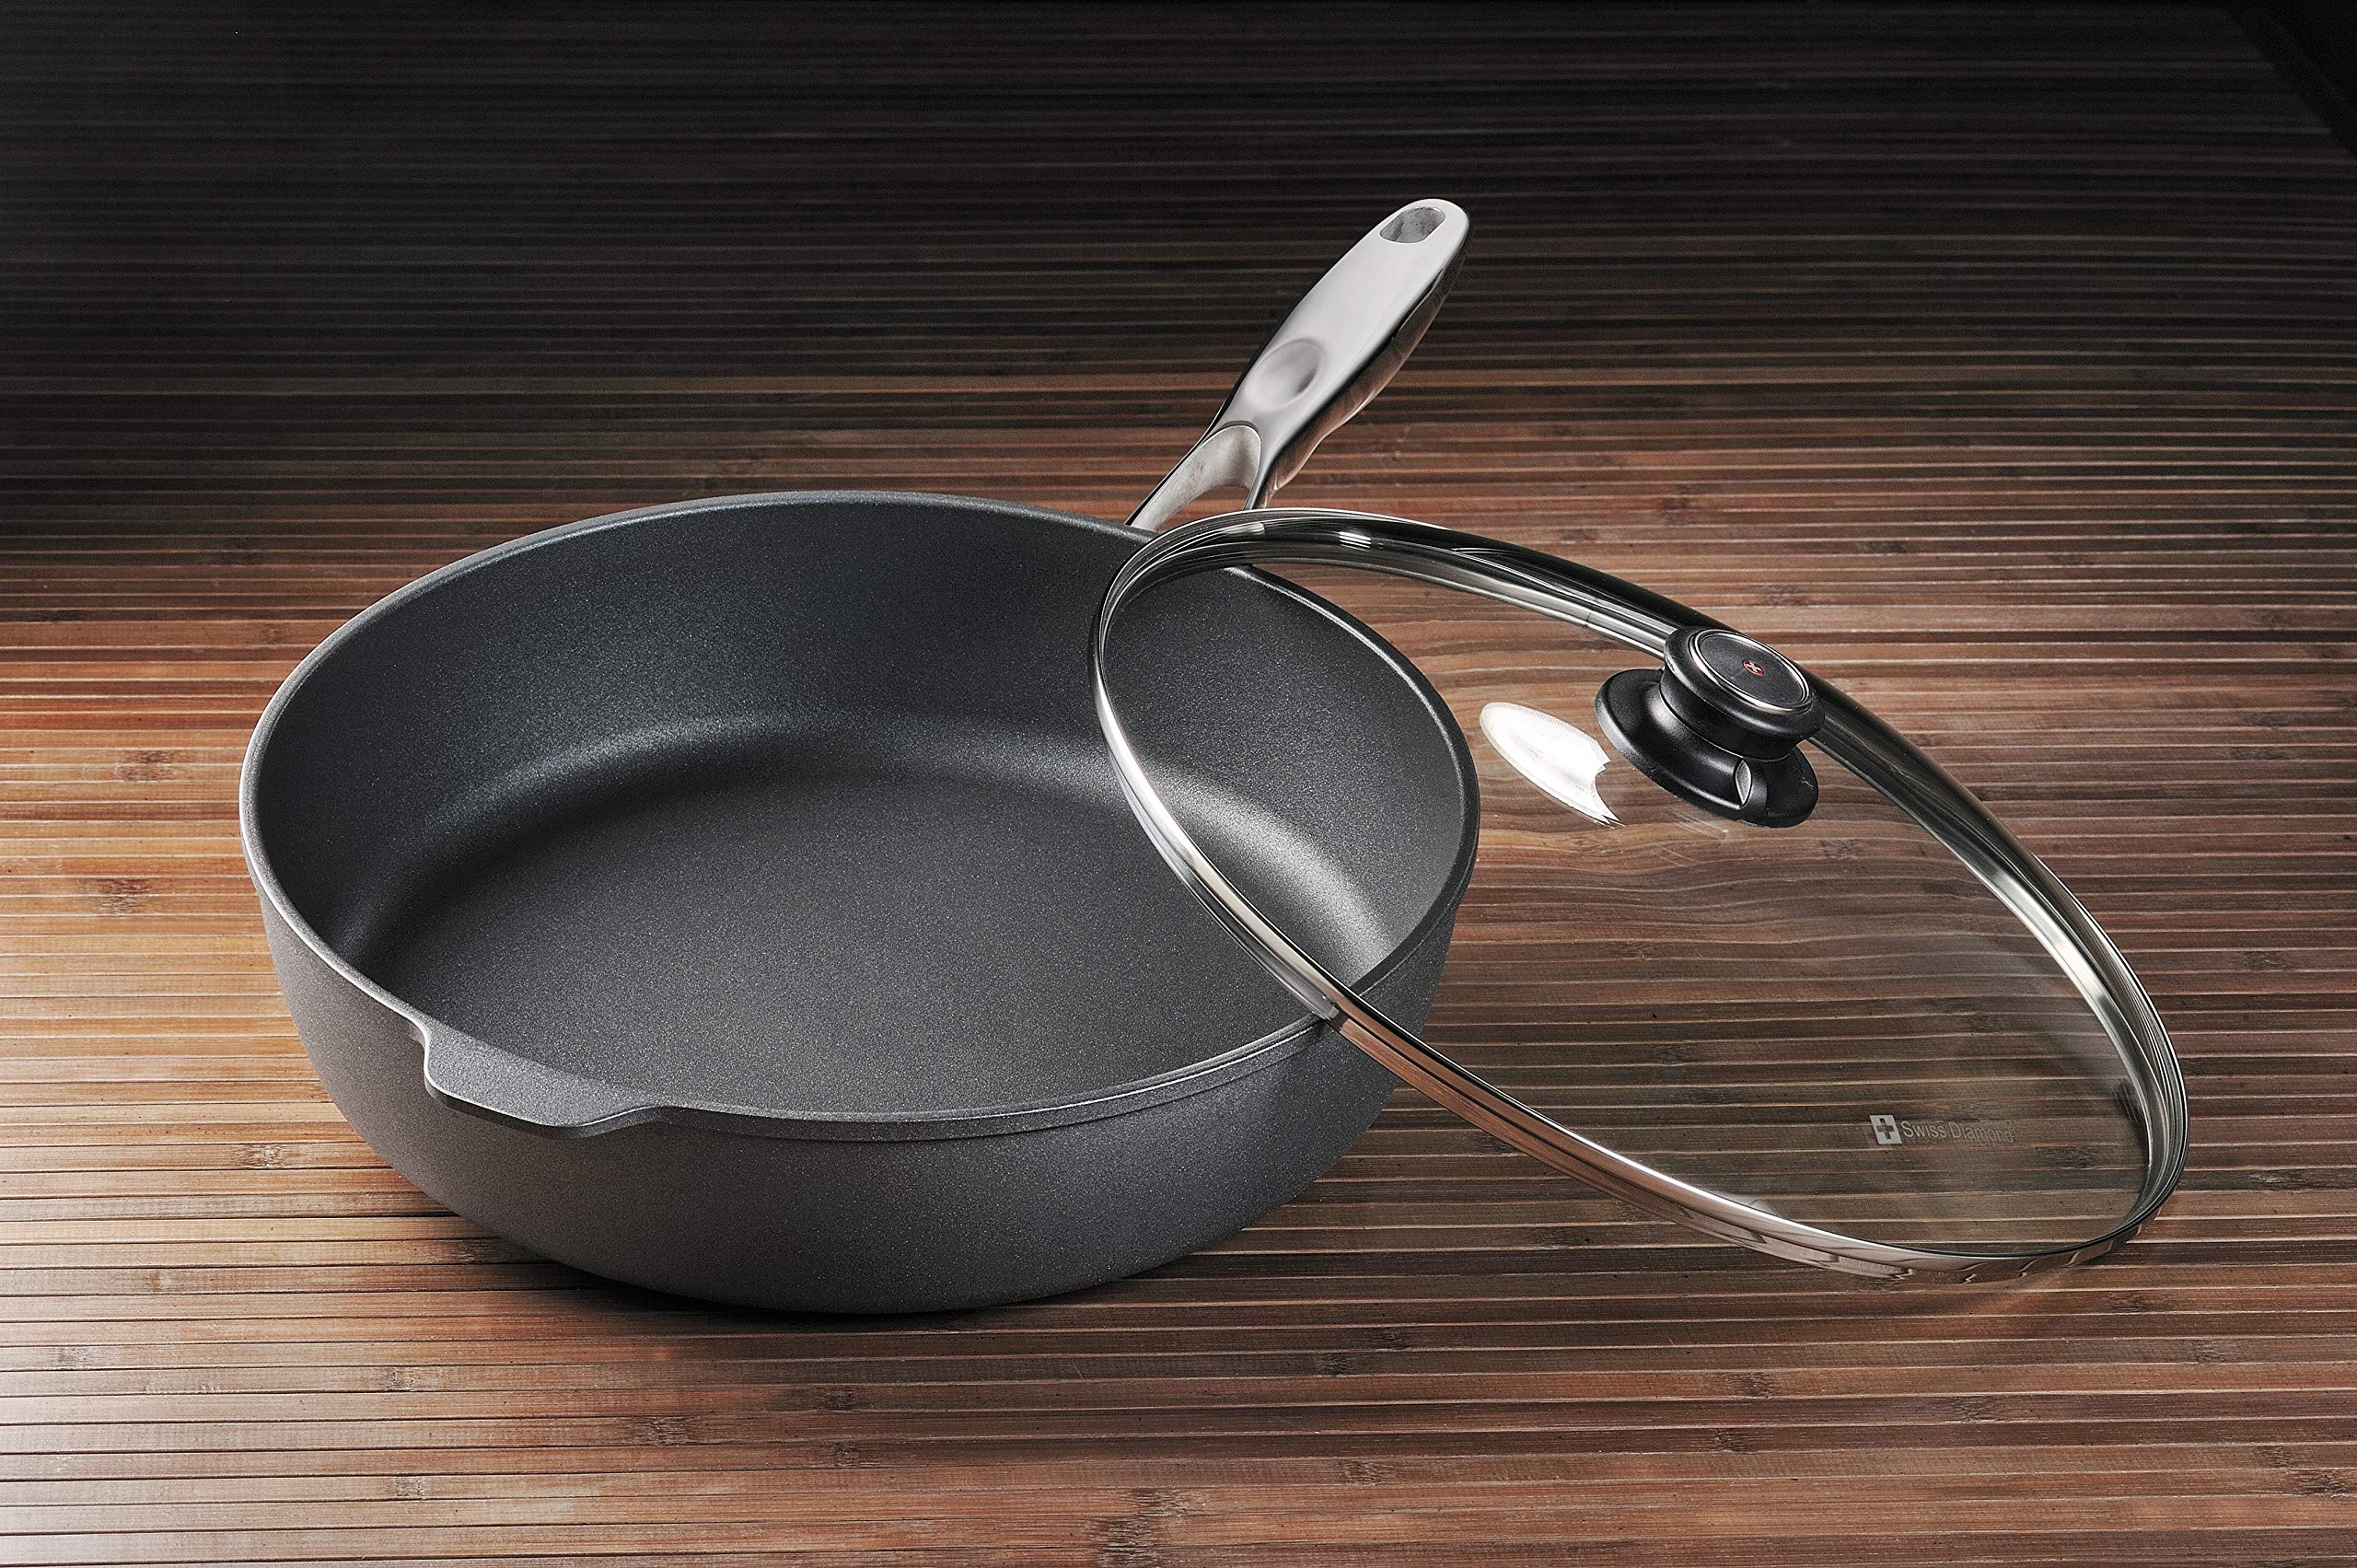 Swiss Diamond 5.8 Quart, 12.5 Inch Saute Pan HD Nonstick Includes Lid and Stainless Steel Handle, PFOA Free, Dishwasher and Oven Safe Skillet, Grey